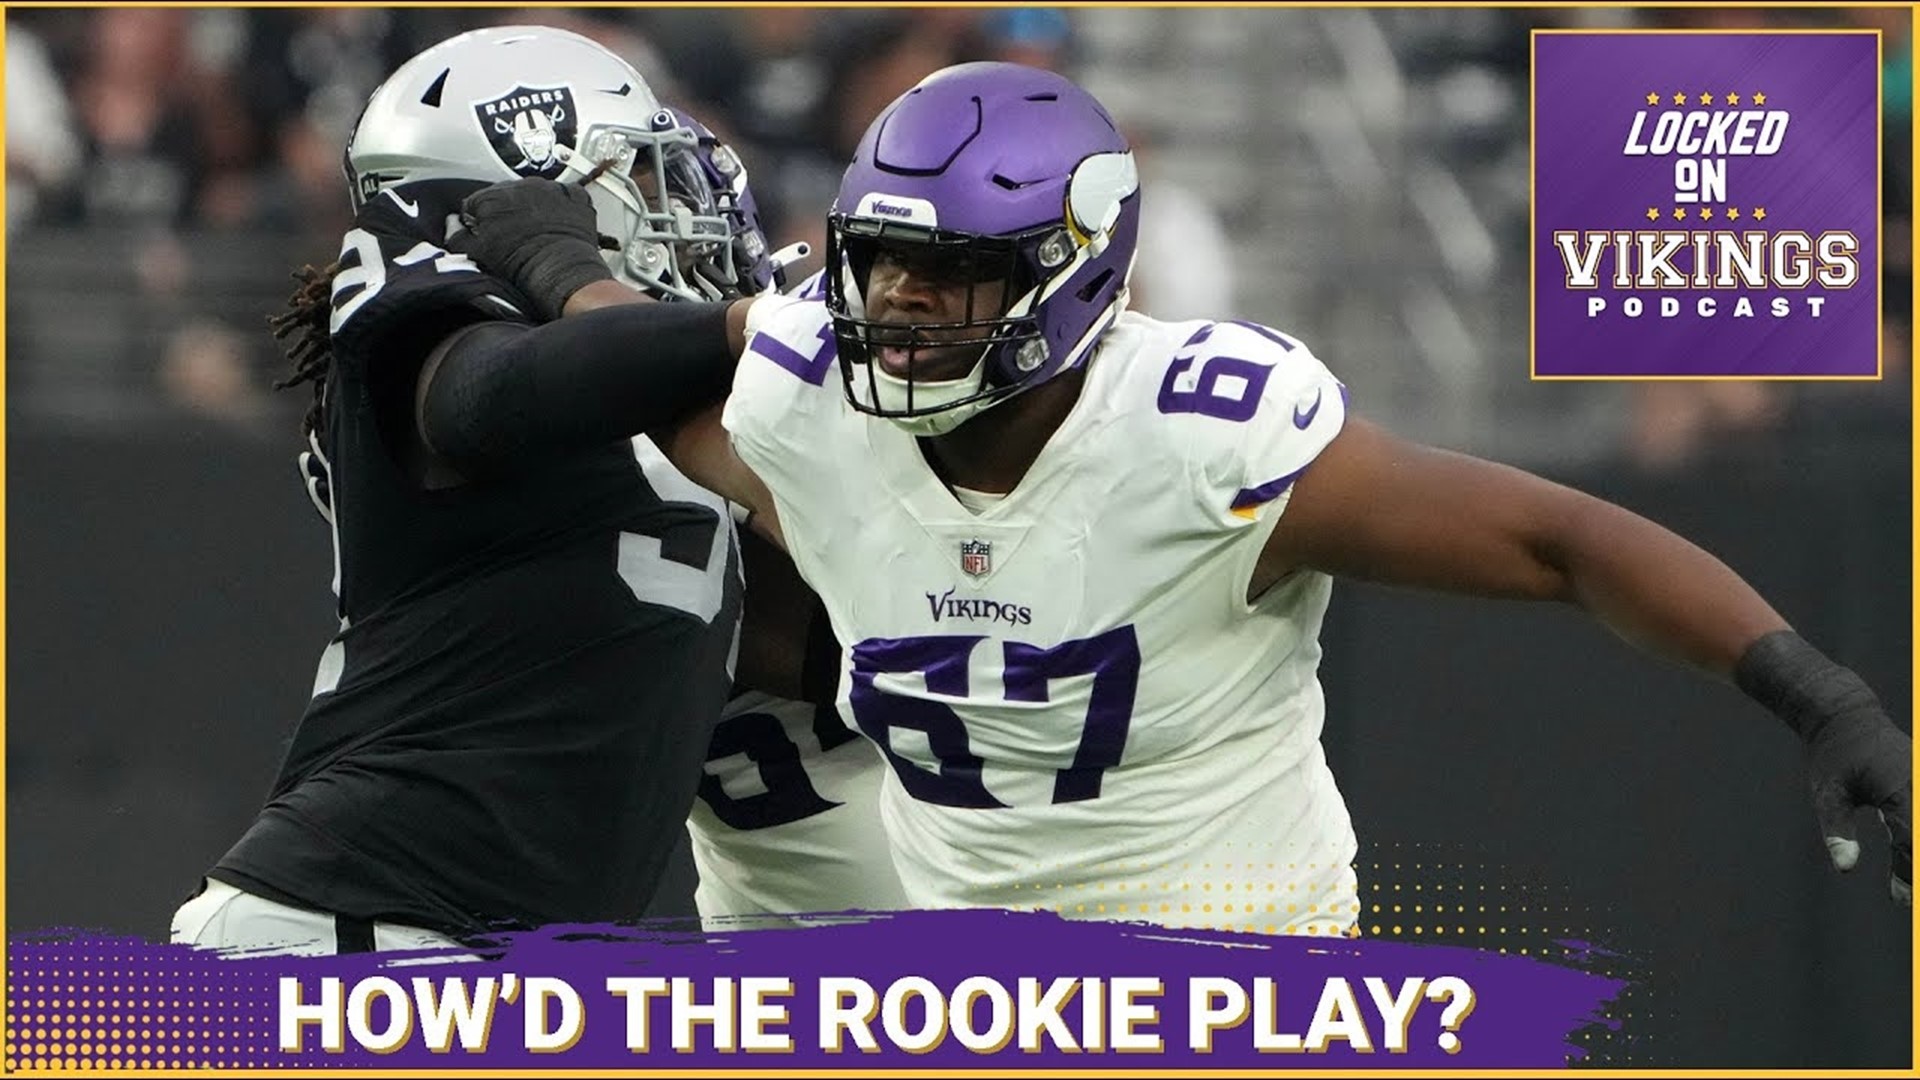 Minnesota Vikings RG Ed Ingram improved as the 2022 season went on. I've been saying this for a while, but I never did the deep dive that topic warrants.